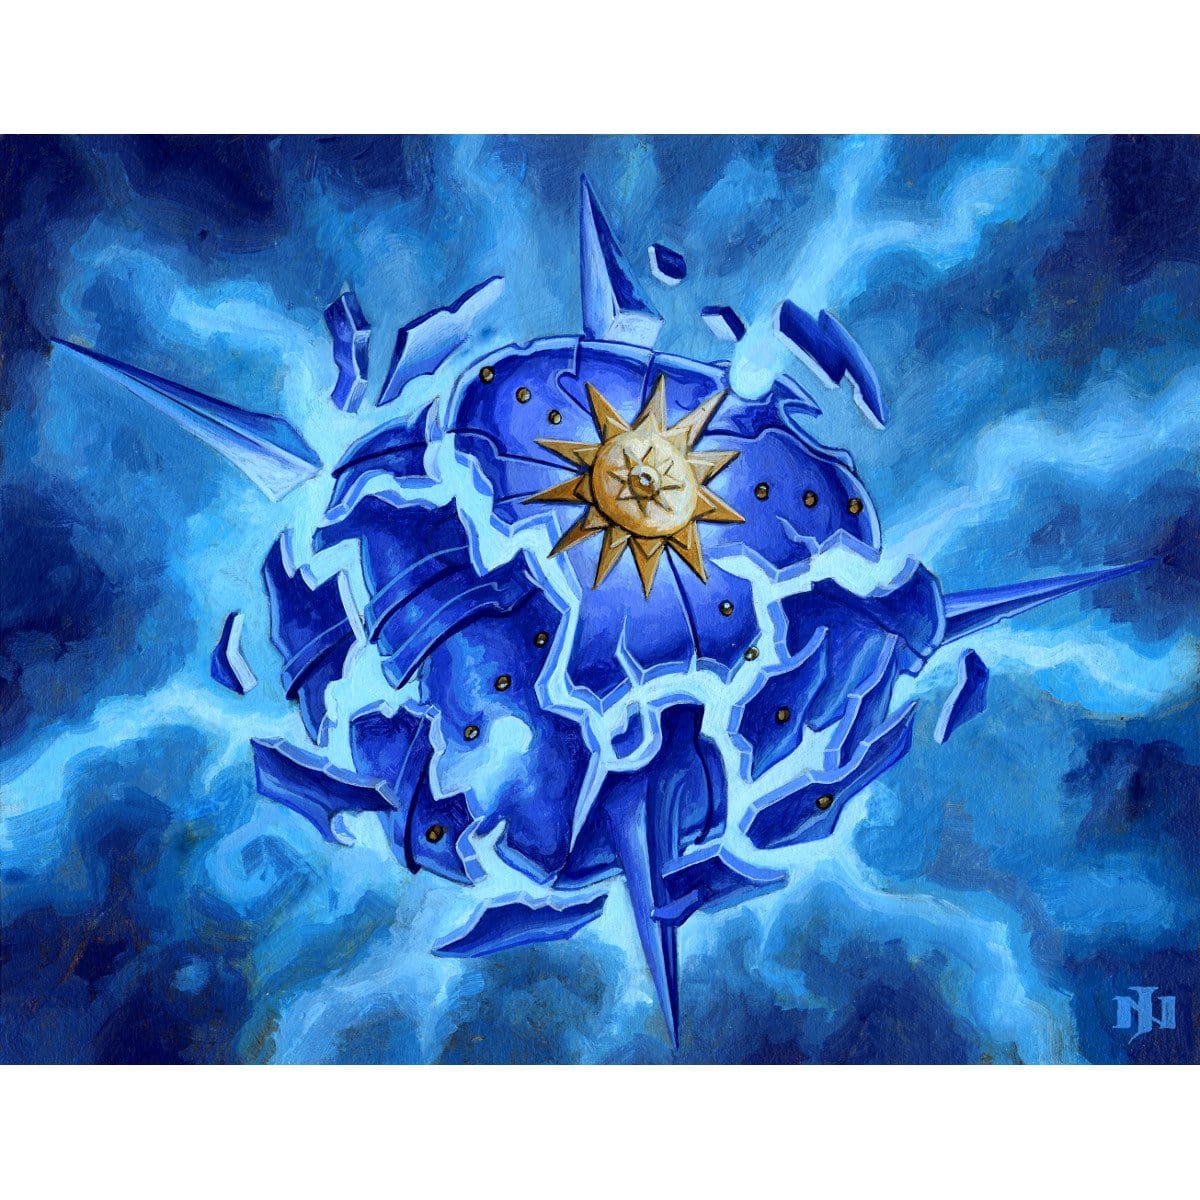 Aether Spellbomb Print - Print - Original Magic Art - Accessories for Magic the Gathering and other card games